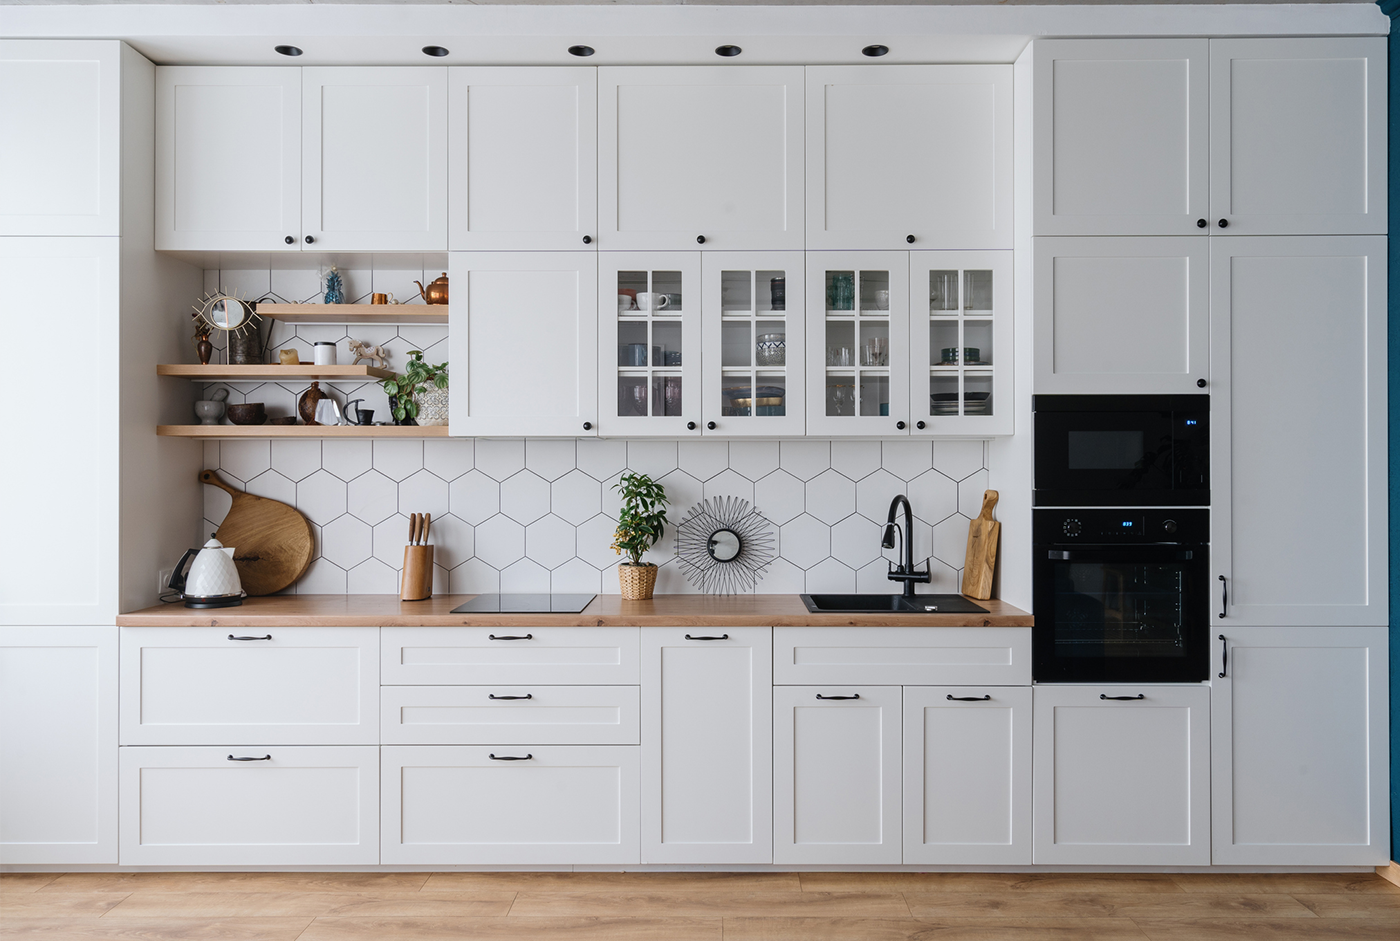 Kitchen featuring White Shaker cabinets, courtesy of iStock Photo